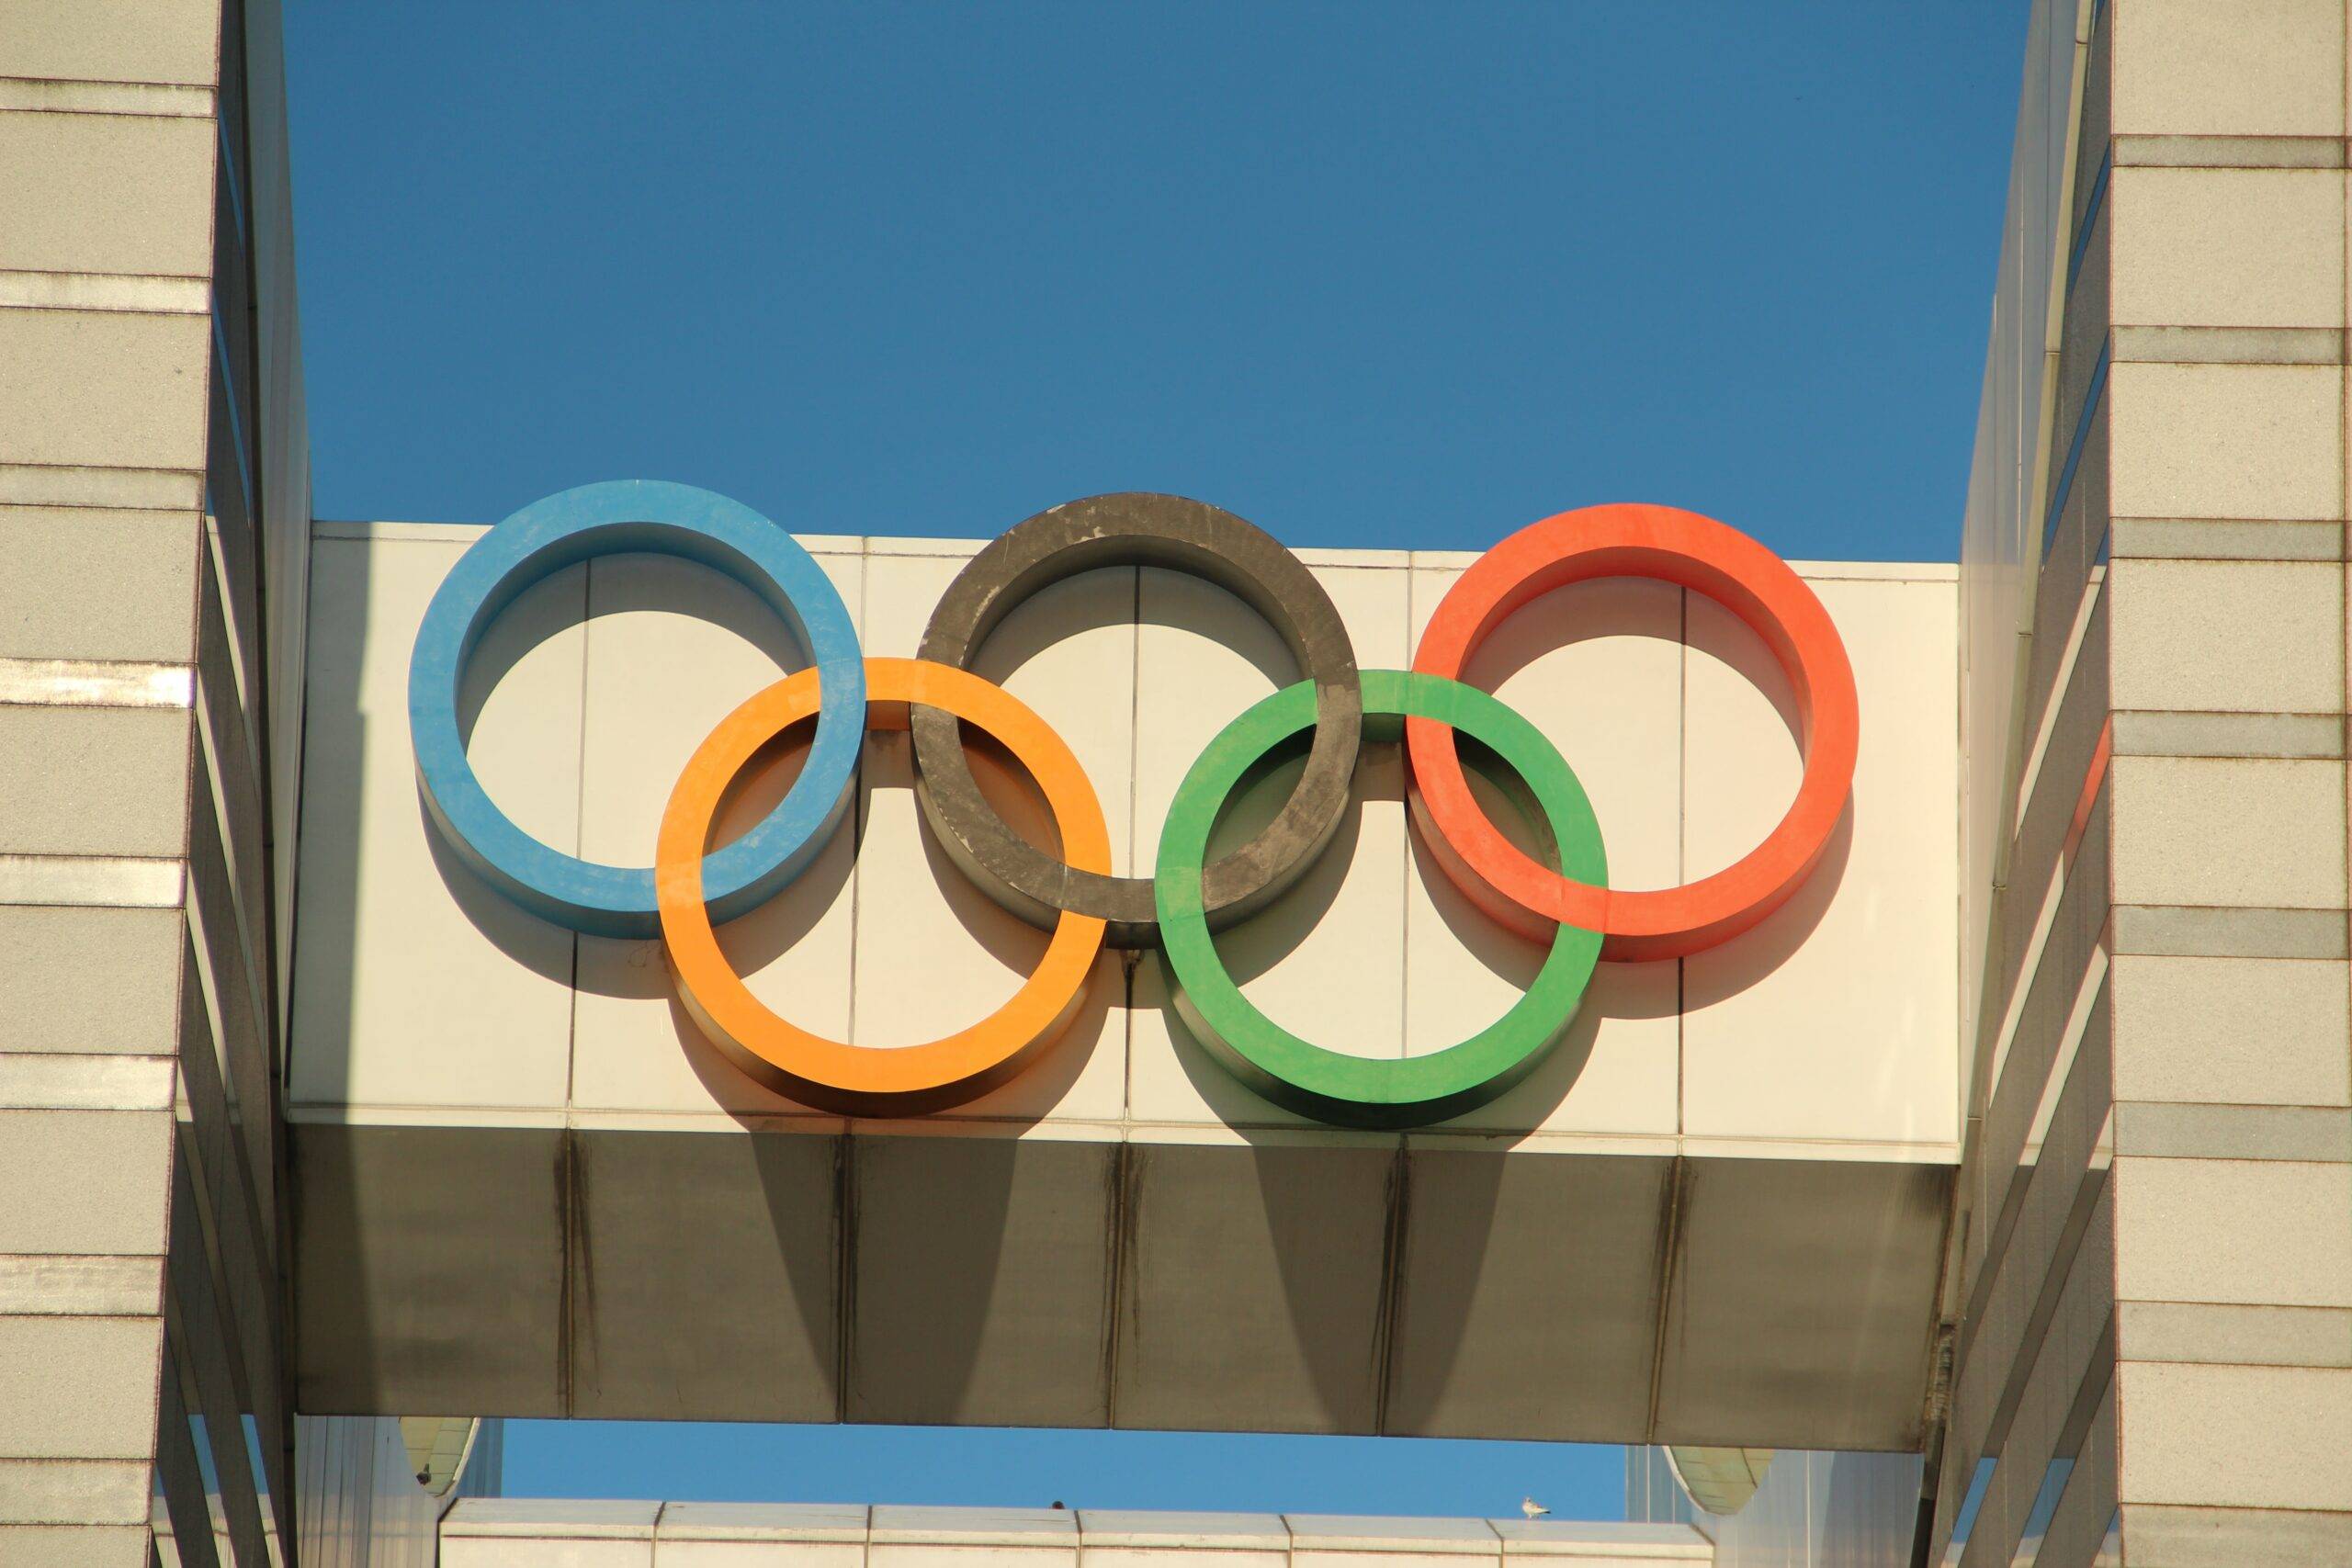 Poland to bid for 2036 Olympic and Paralympic Games